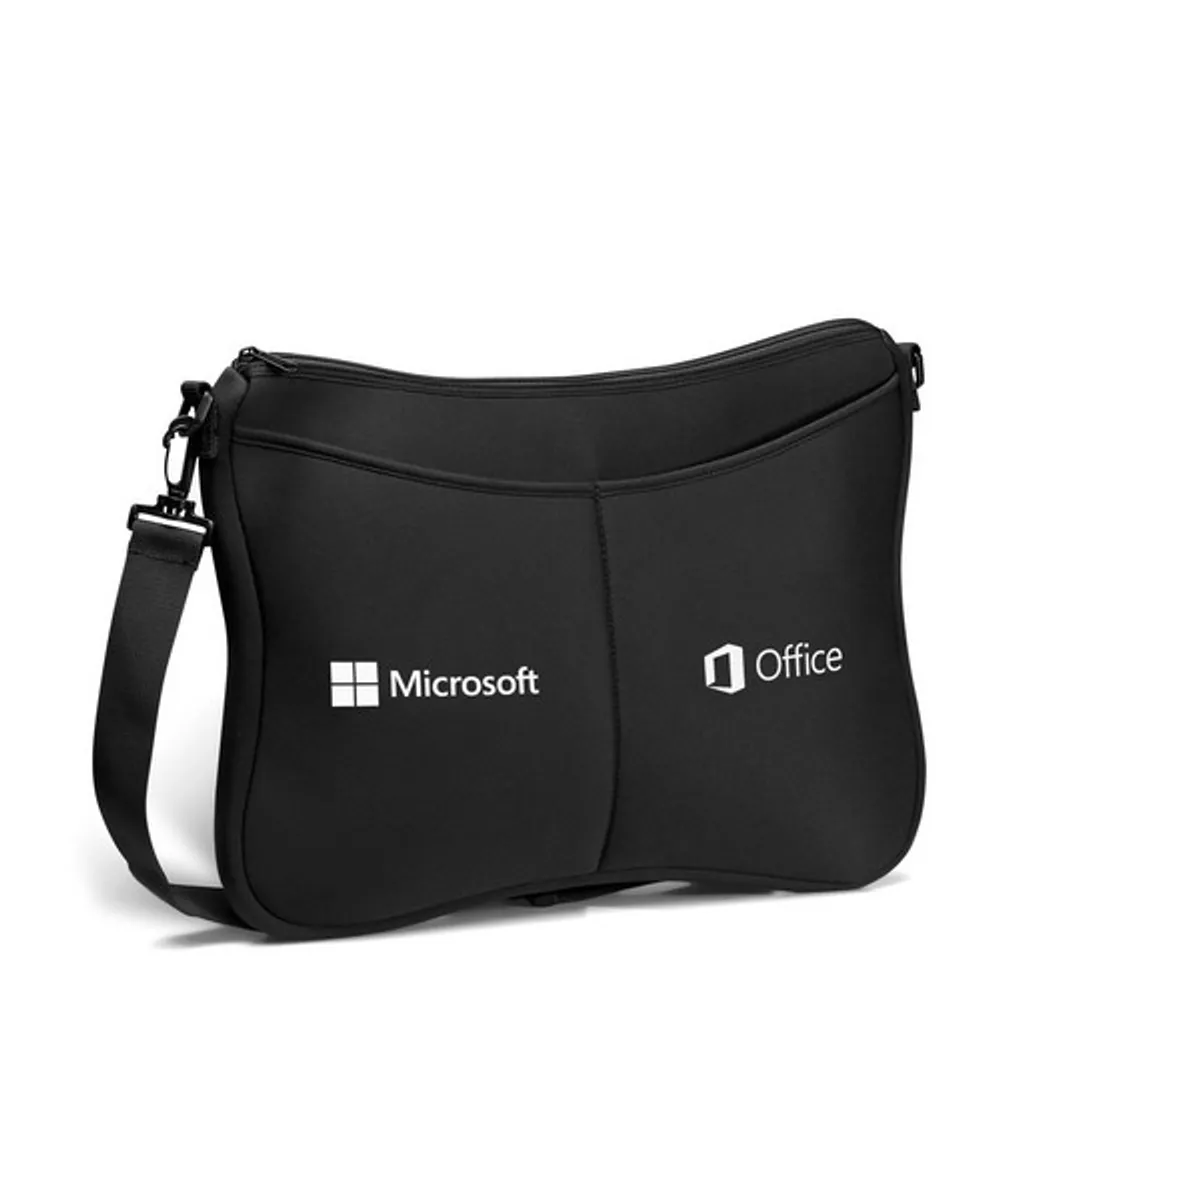 Conference Bags